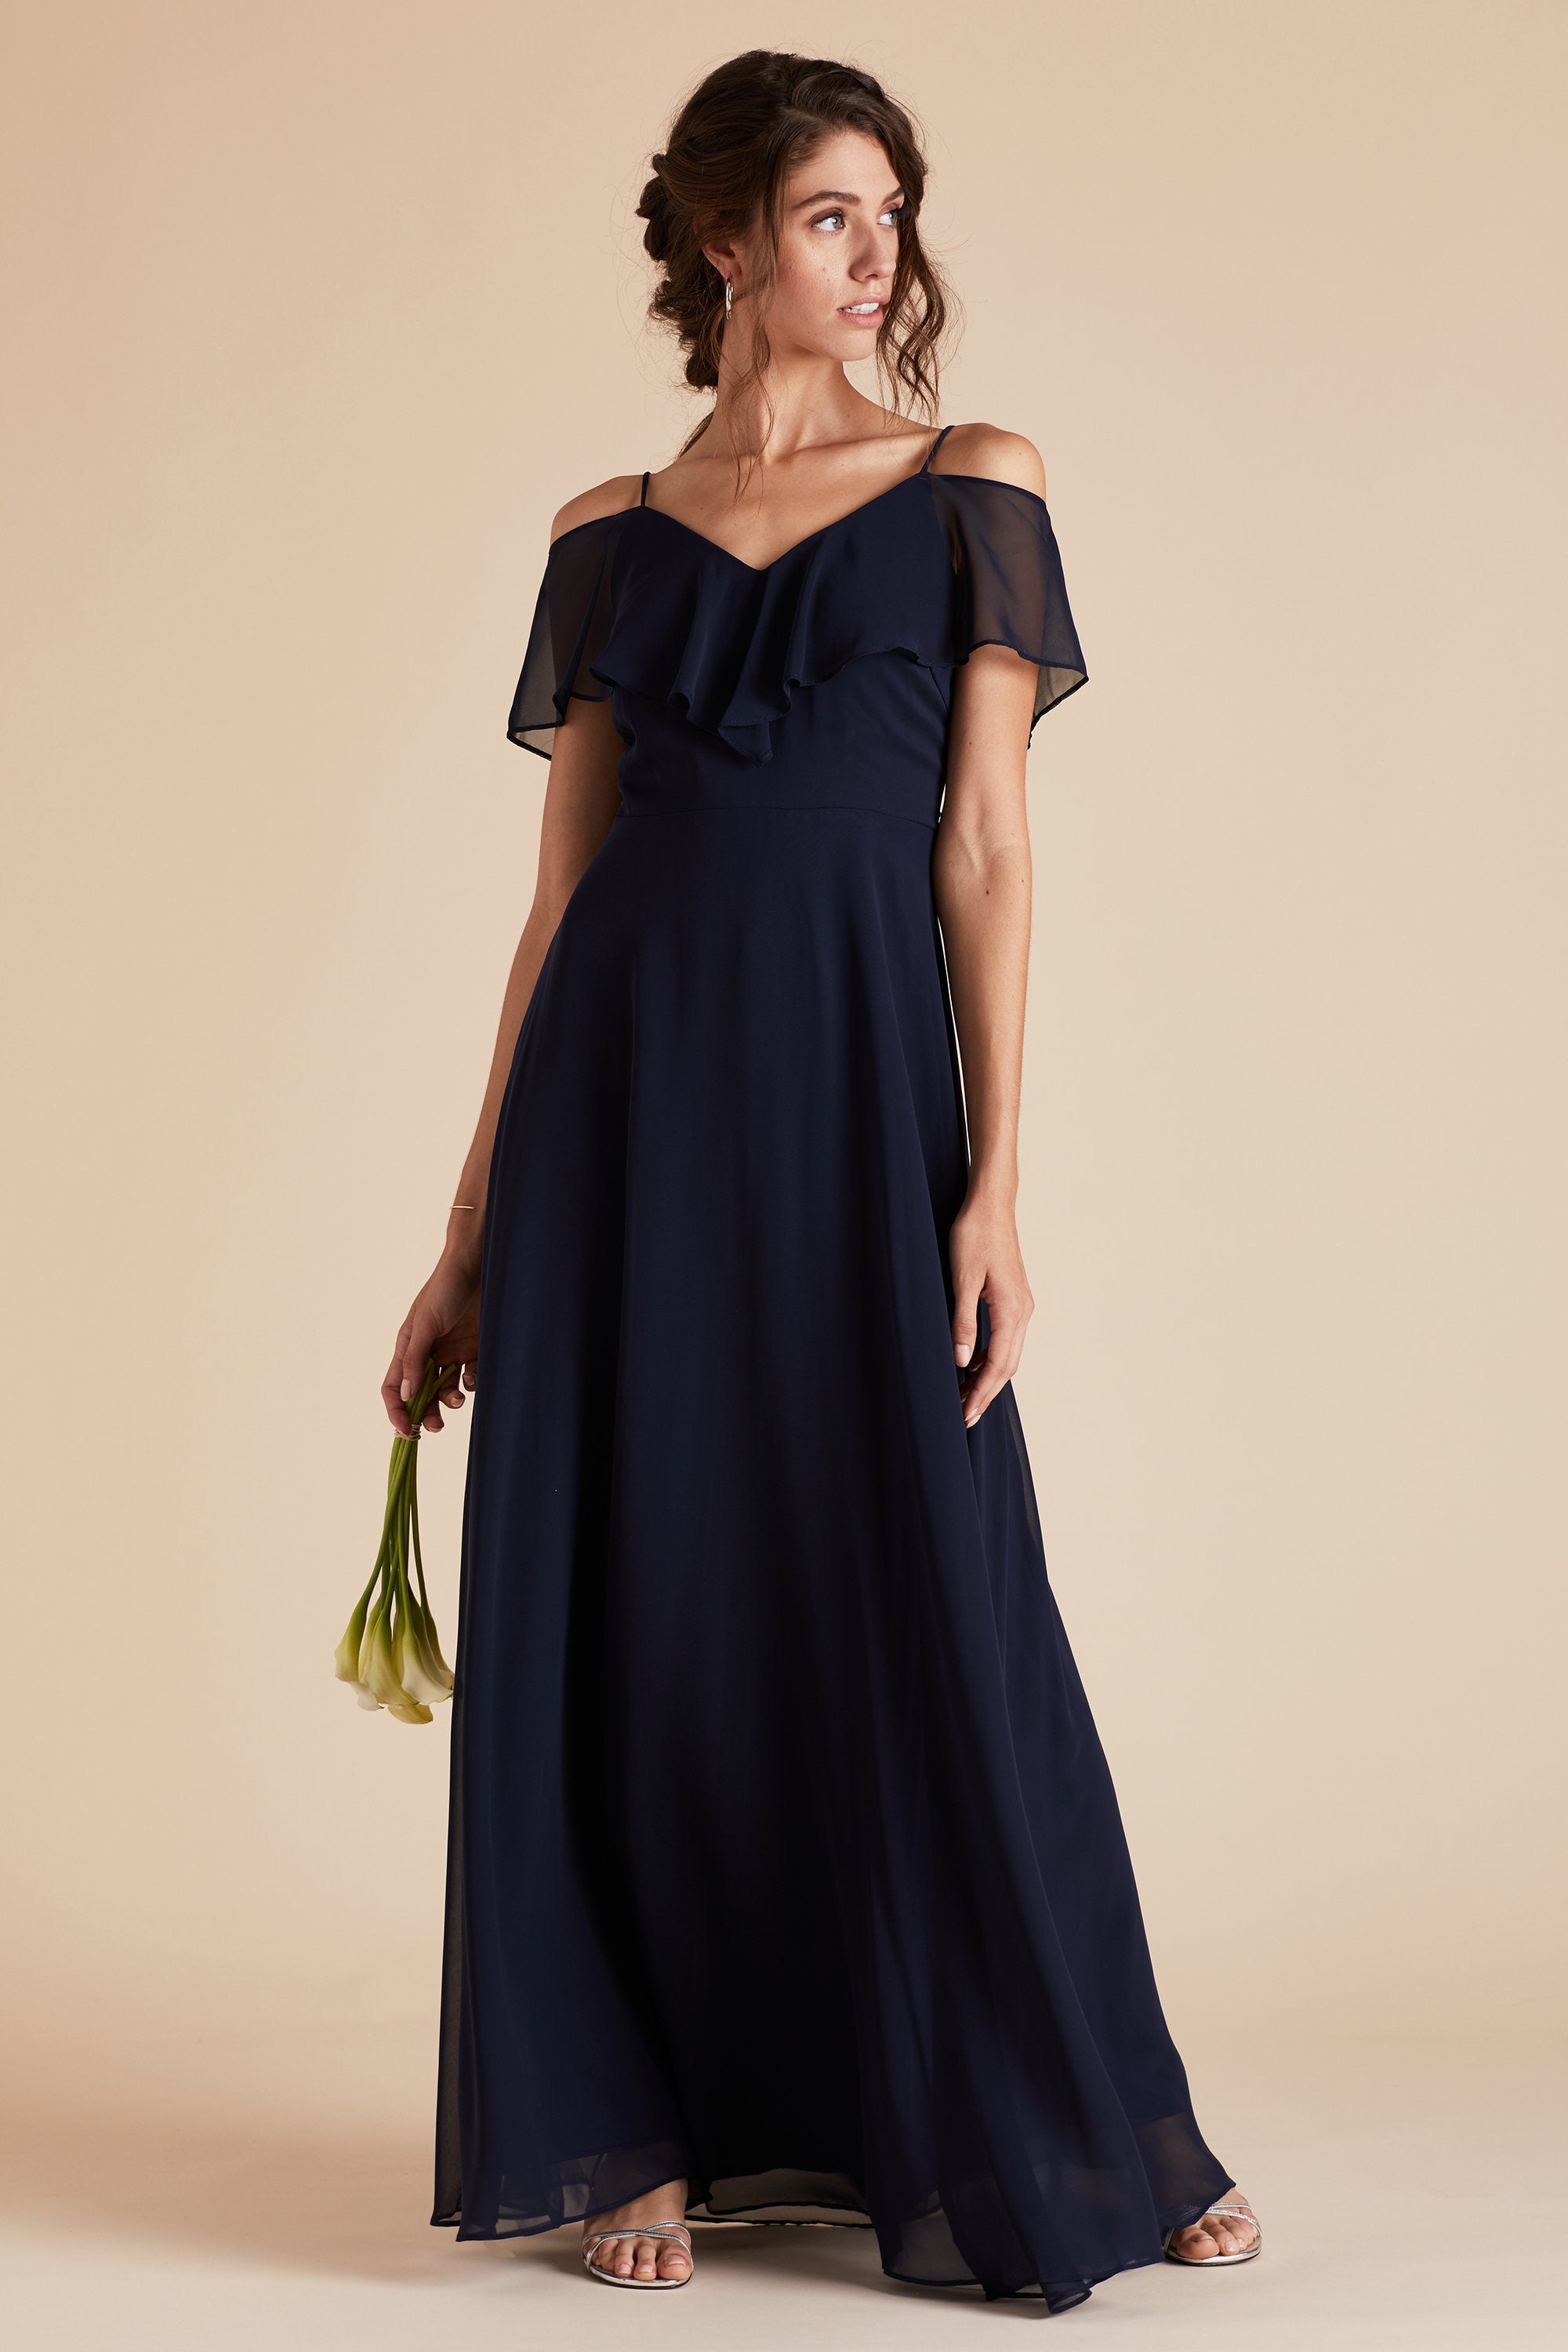 Jane convertible bridesmaid dress in navy blue chiffon by Birdy Grey, front viewJane convertible bridesmaid dress with slit in navy blue chiffon by Birdy Grey, front view